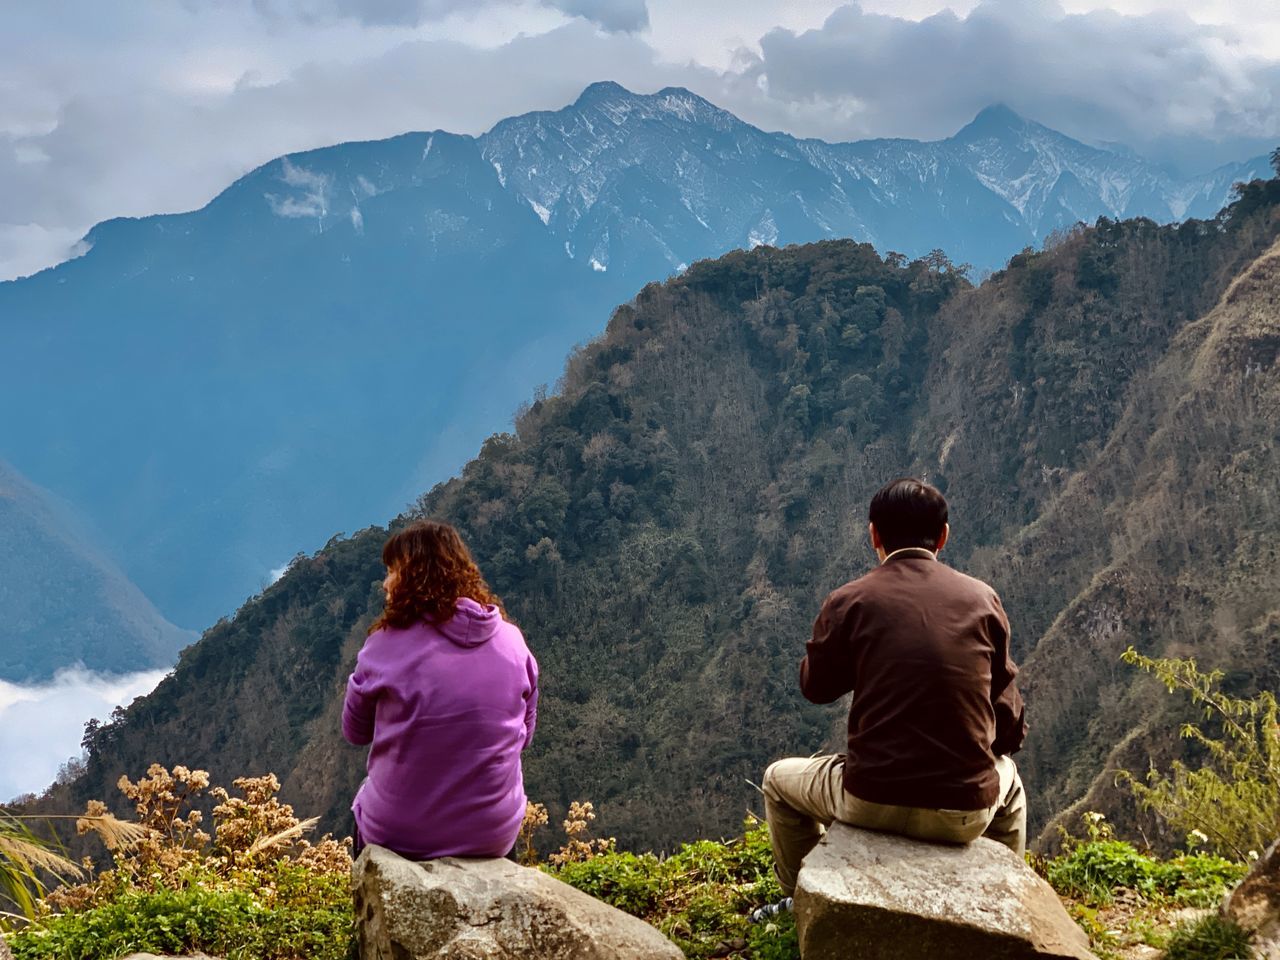 mountain, rear view, mountain range, real people, leisure activity, beauty in nature, sitting, scenics - nature, lifestyles, women, two people, nature, sky, tranquil scene, tranquility, adult, togetherness, people, vacations, trip, looking at view, outdoors, mountain peak, couple - relationship